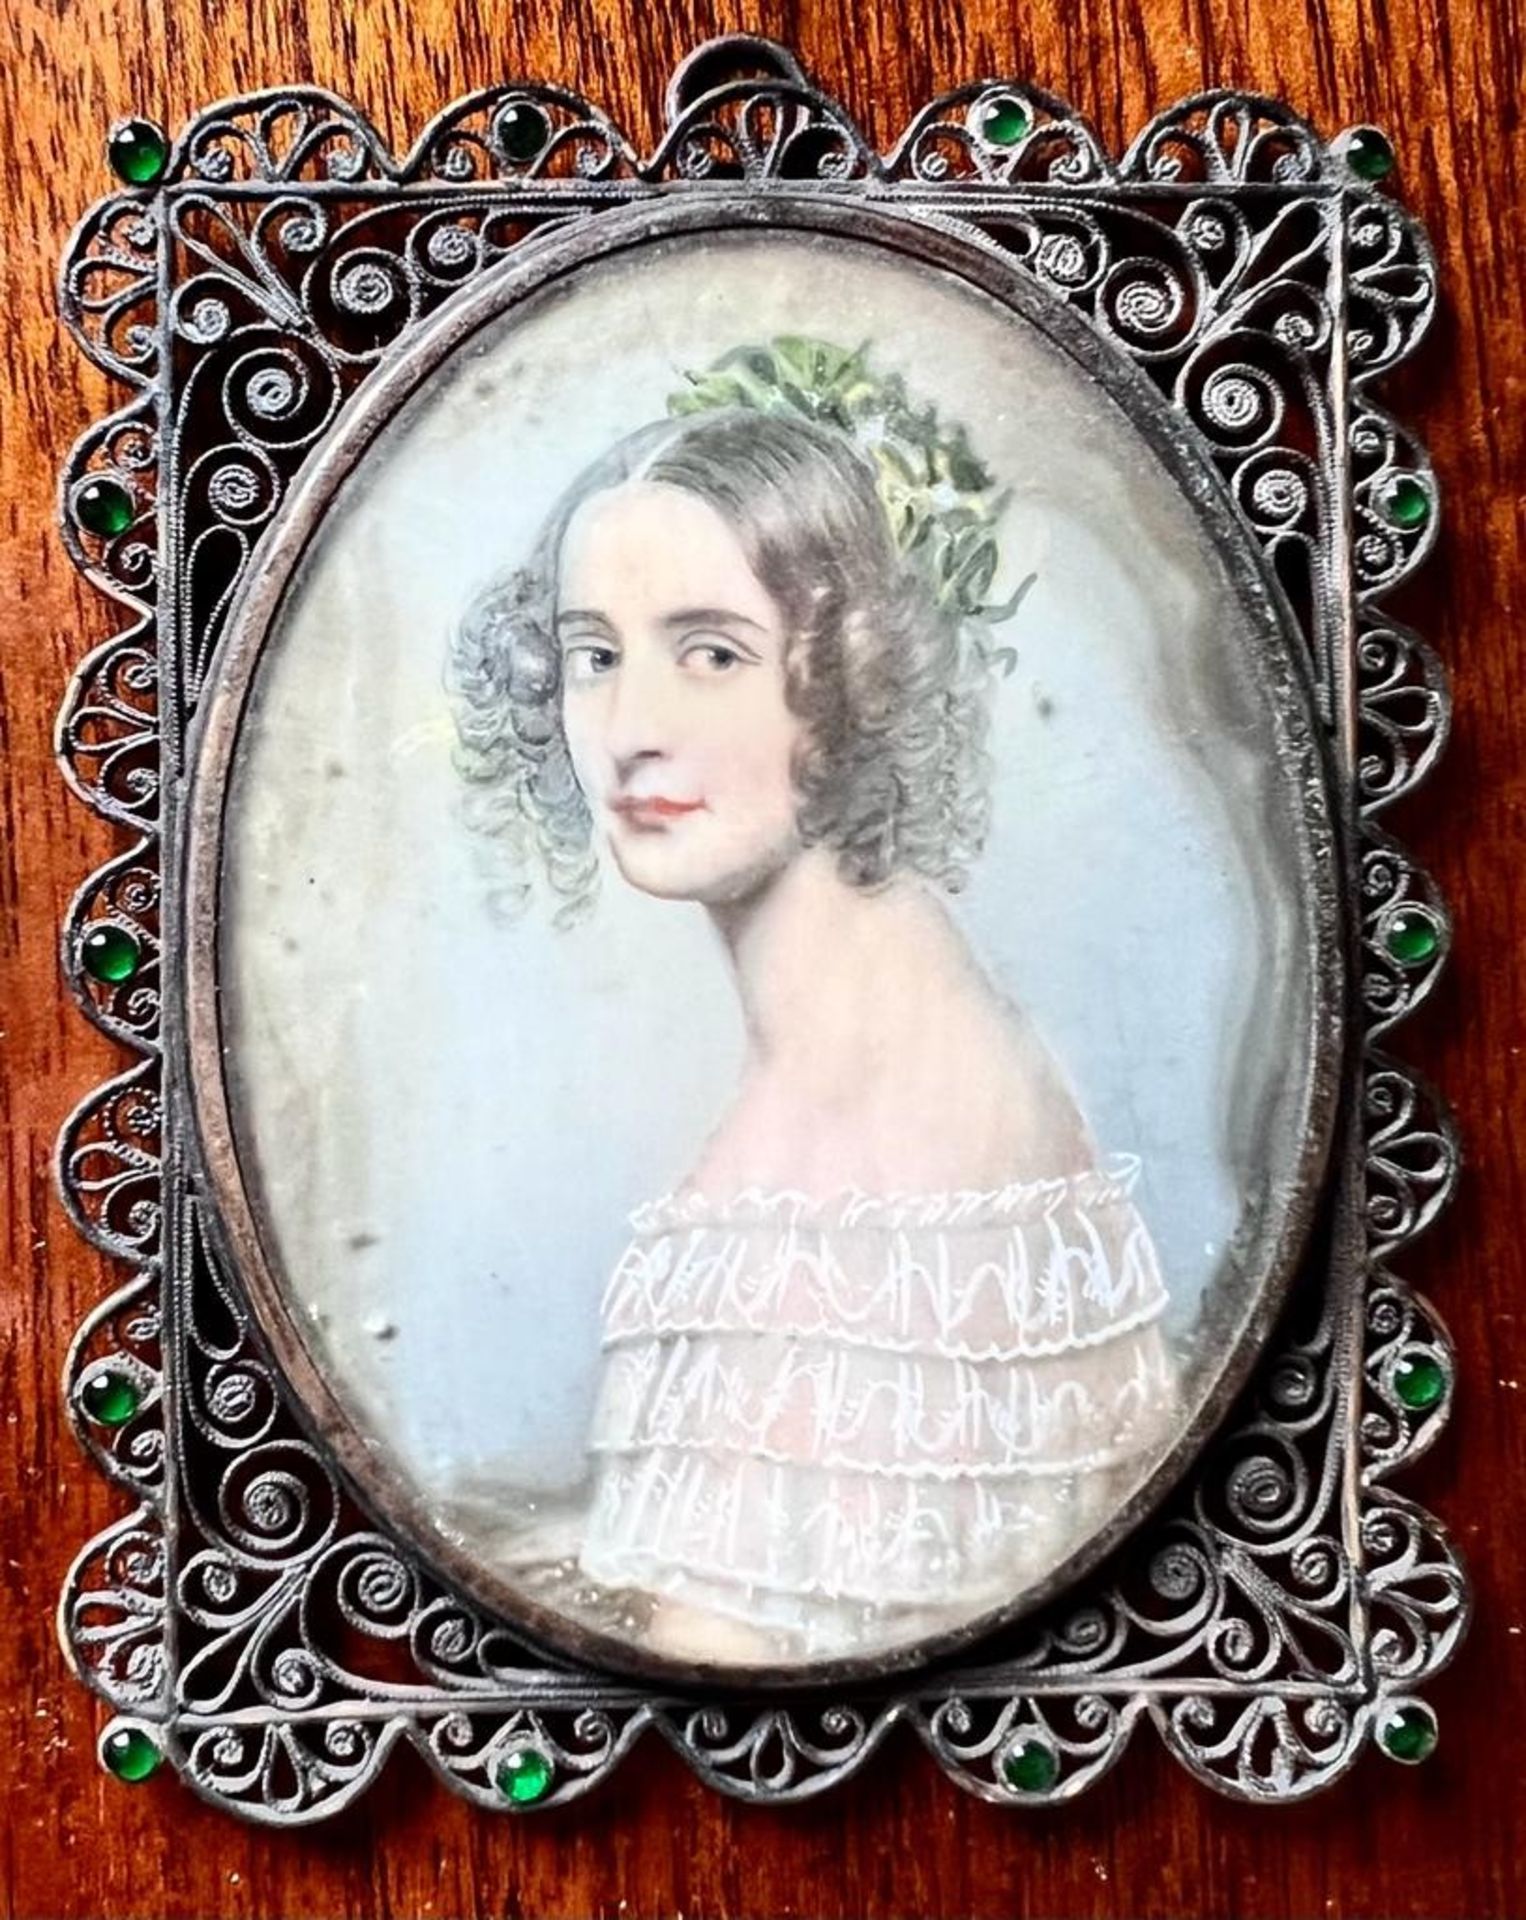 VICTORIA MINIATURE PORTRAIT OF LADY IN SILK FROCK, INITIALLED ON BACK, CIRCA 1850, APPROX 9 x 6.5cm